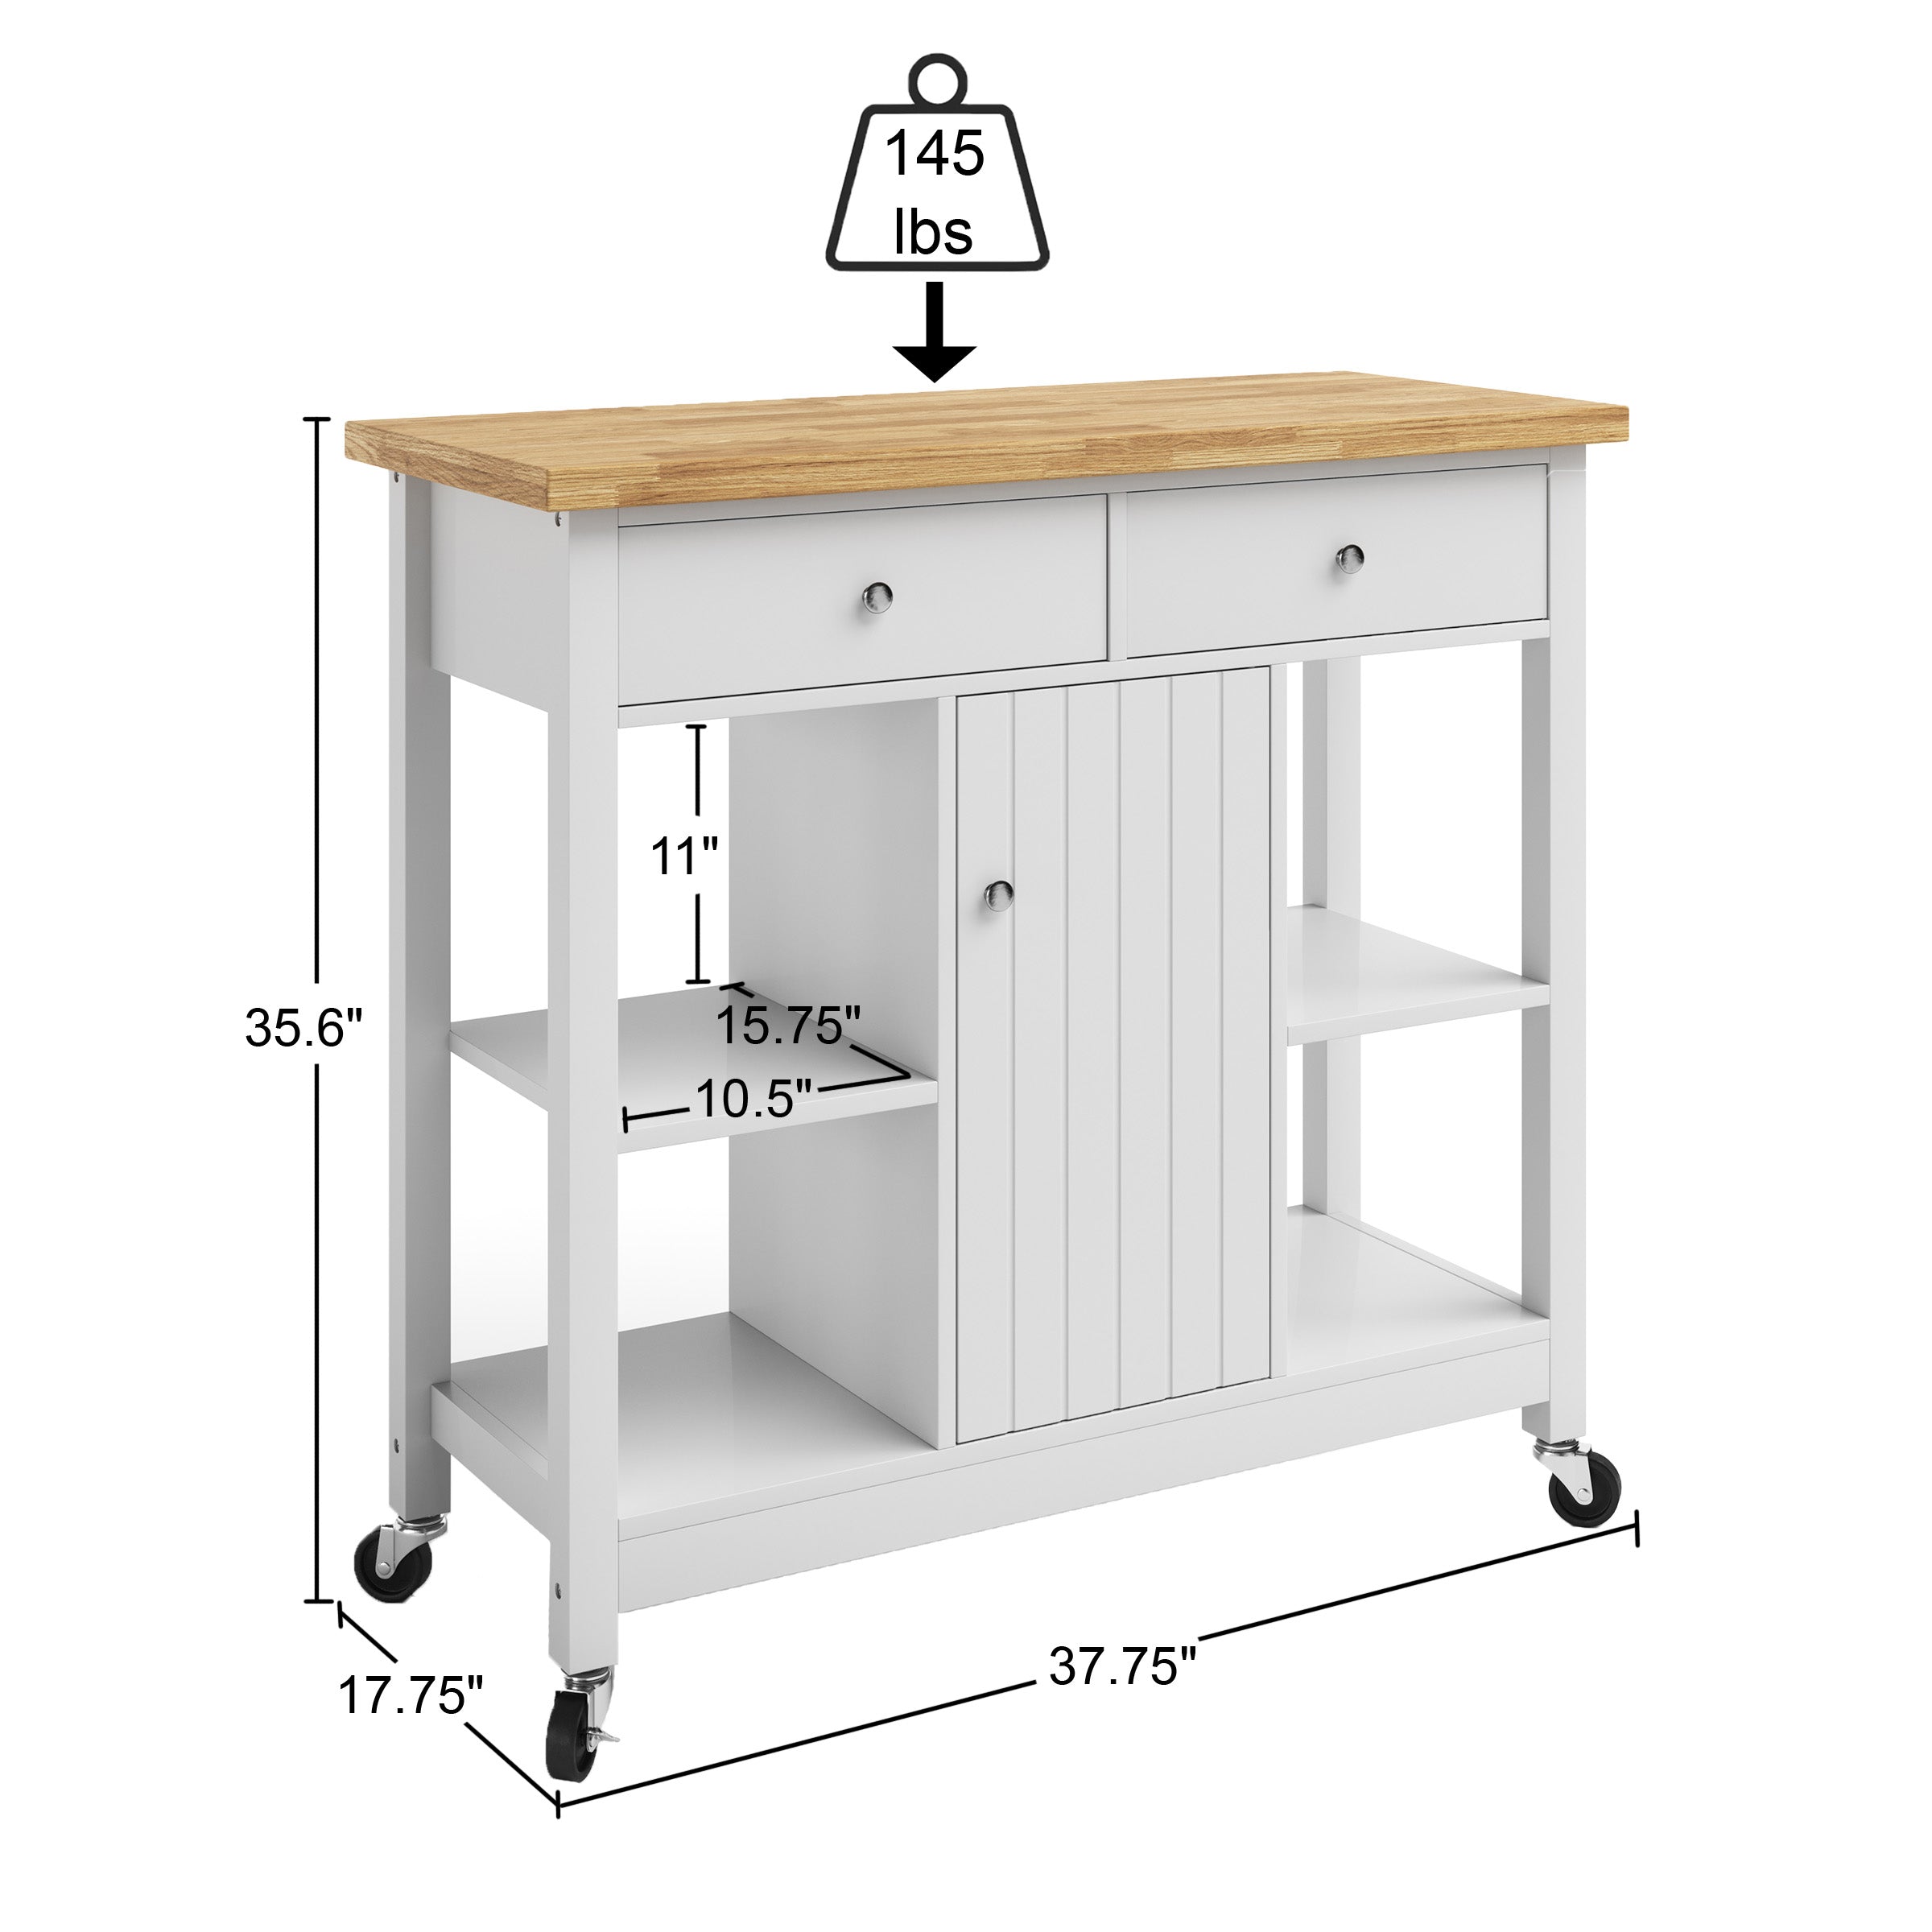 Lavish Home Kitchen Island Rolling Cart with Drawers and Casters， White